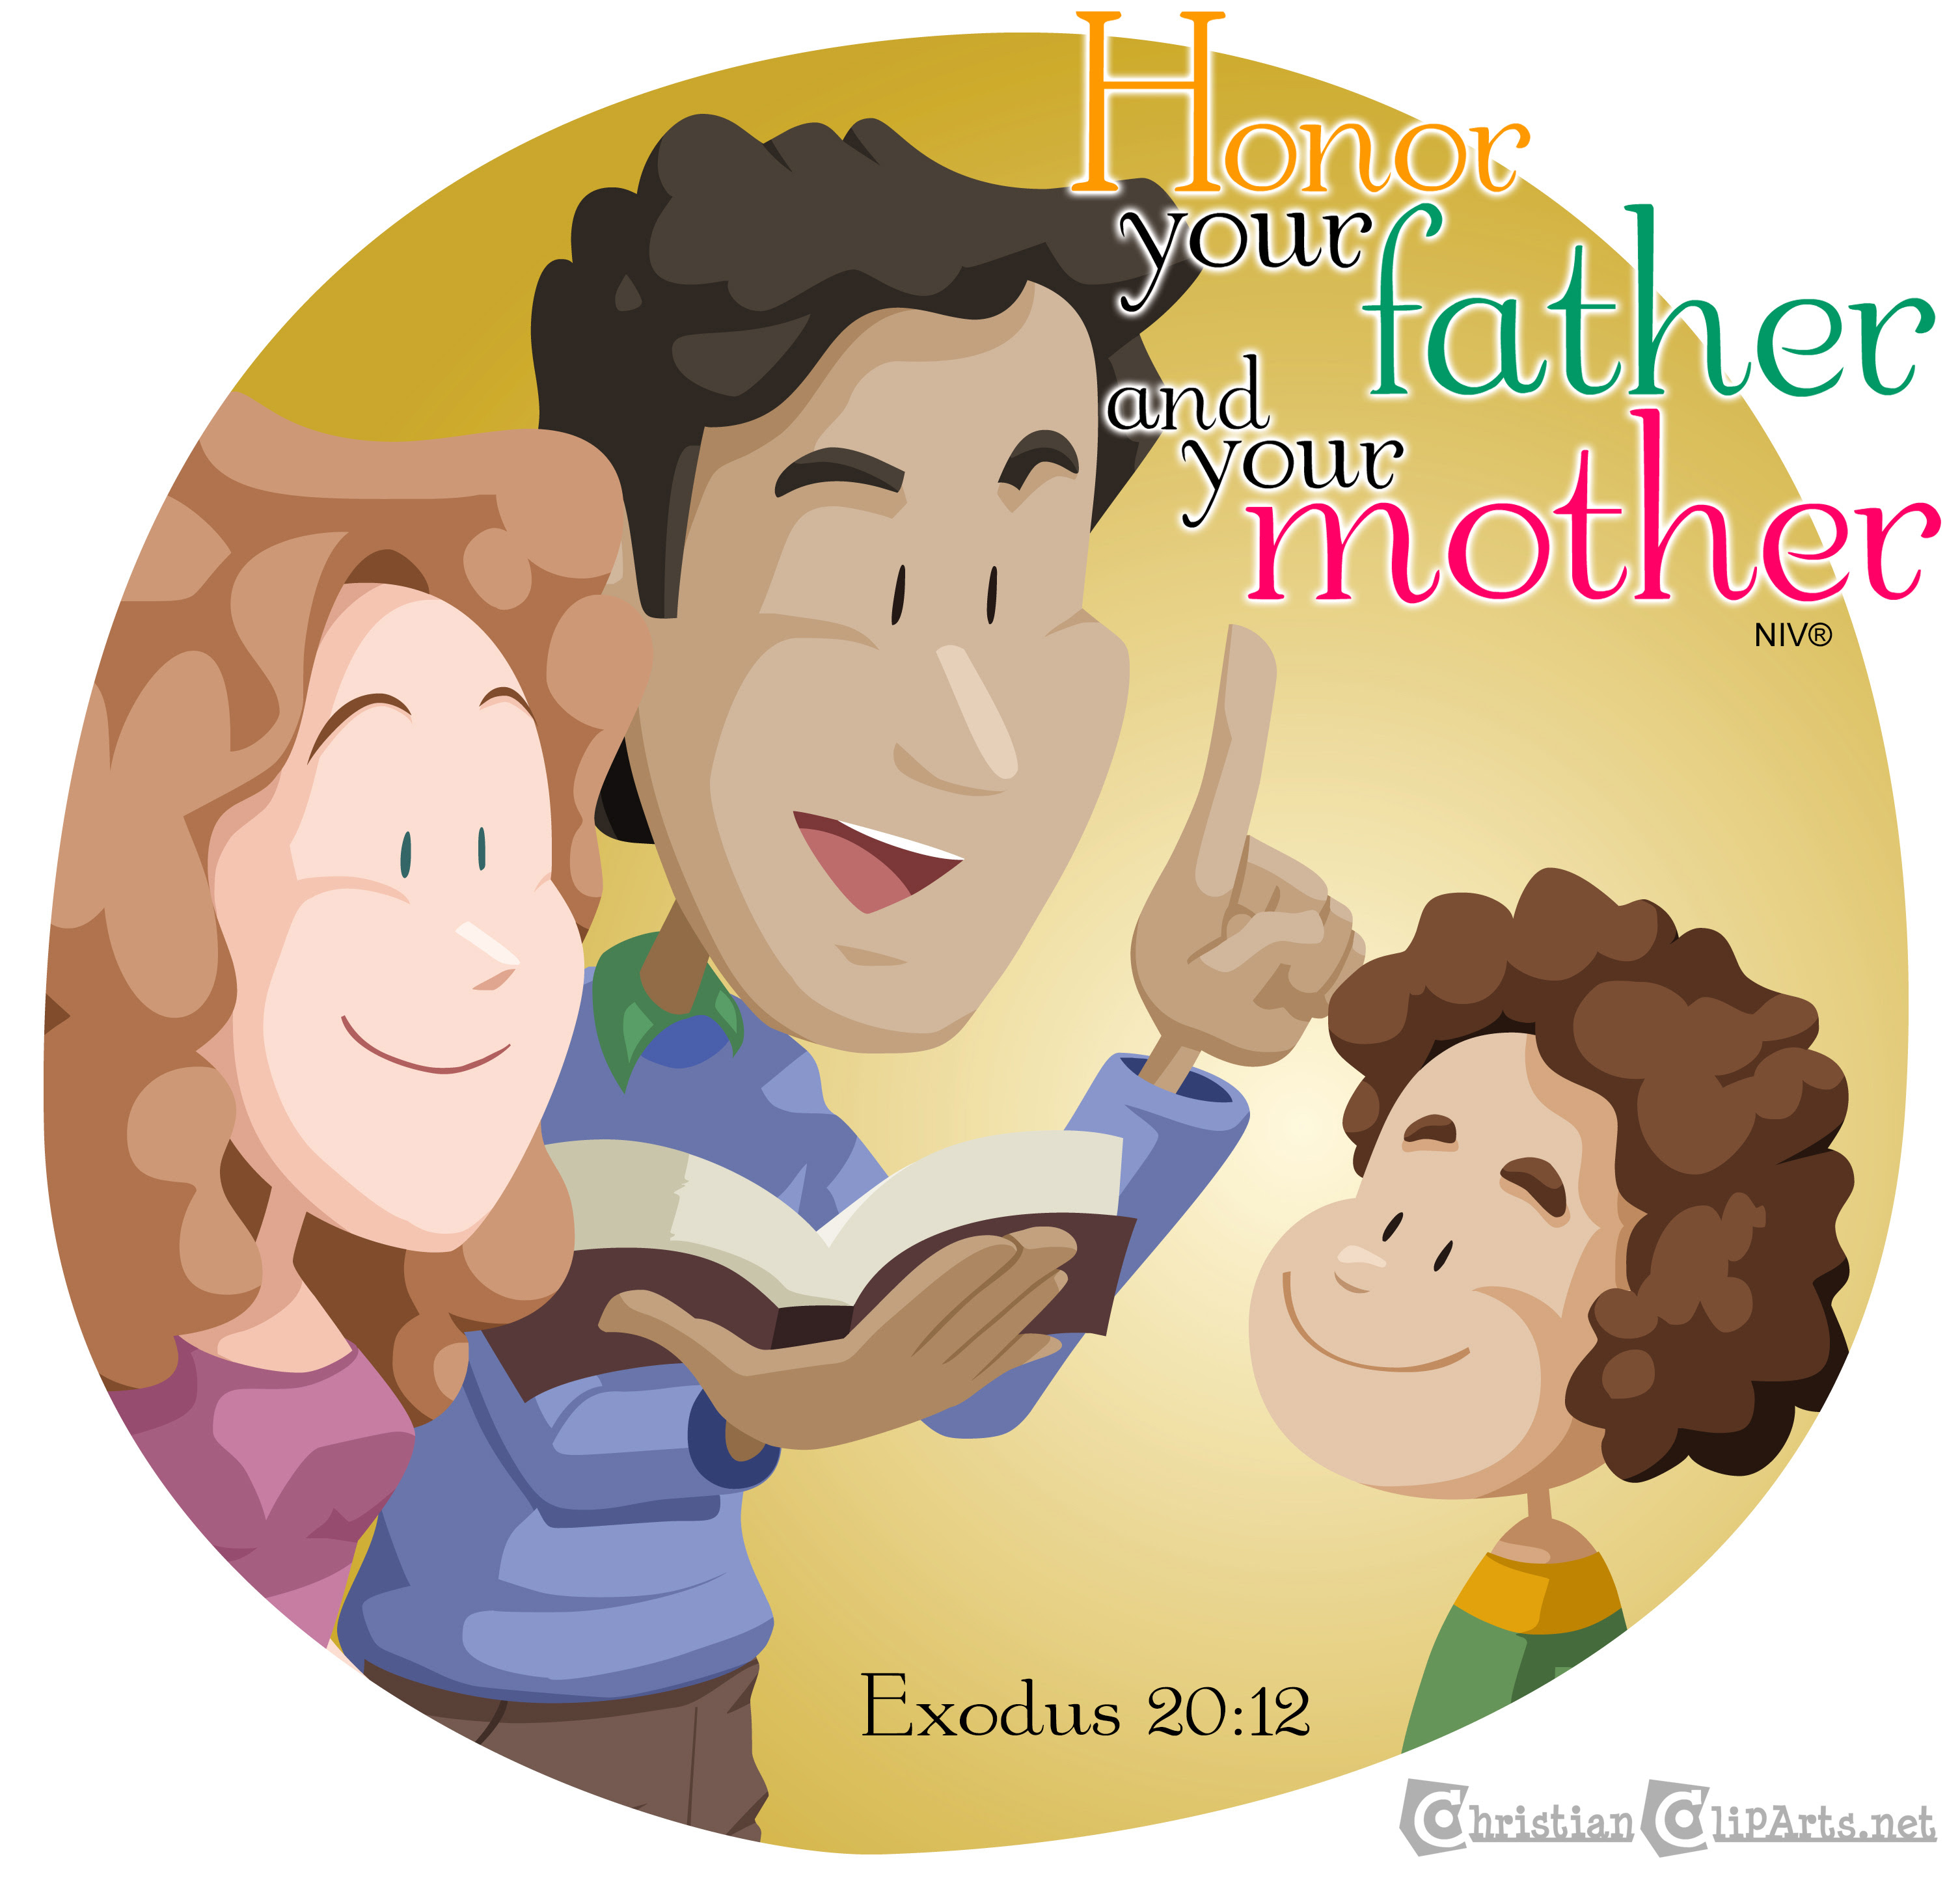 Honour your father and your mother